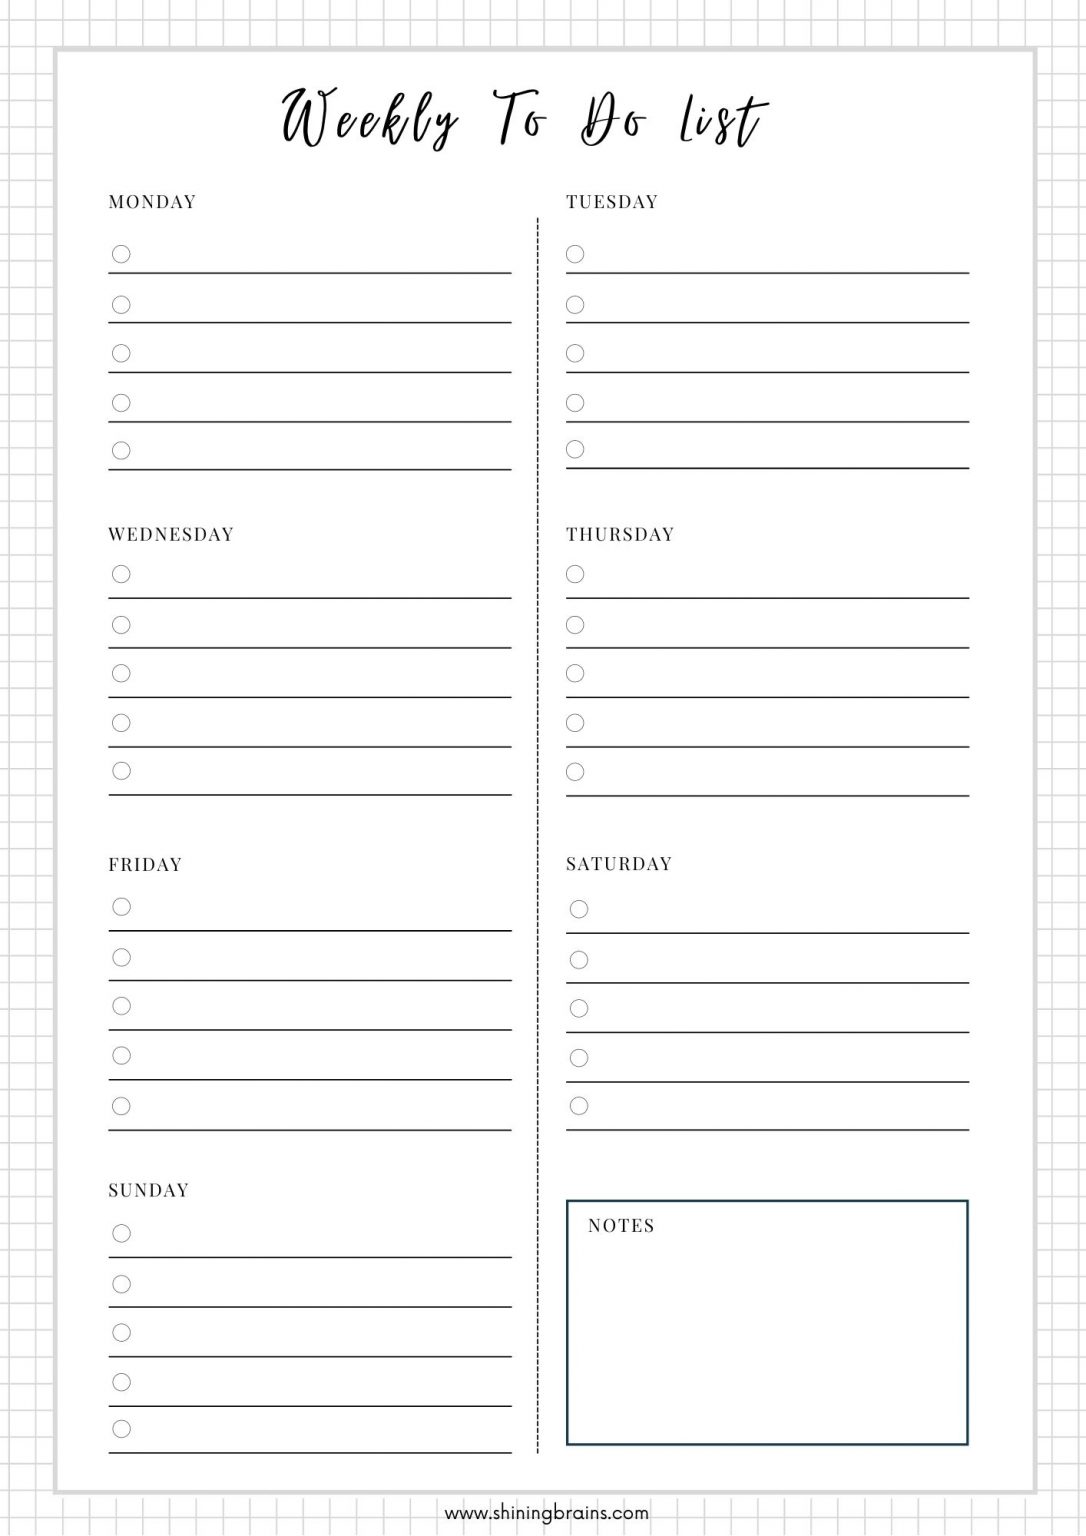 weekly-to-do-list-shining-brains-to-do-checklist-template-printable